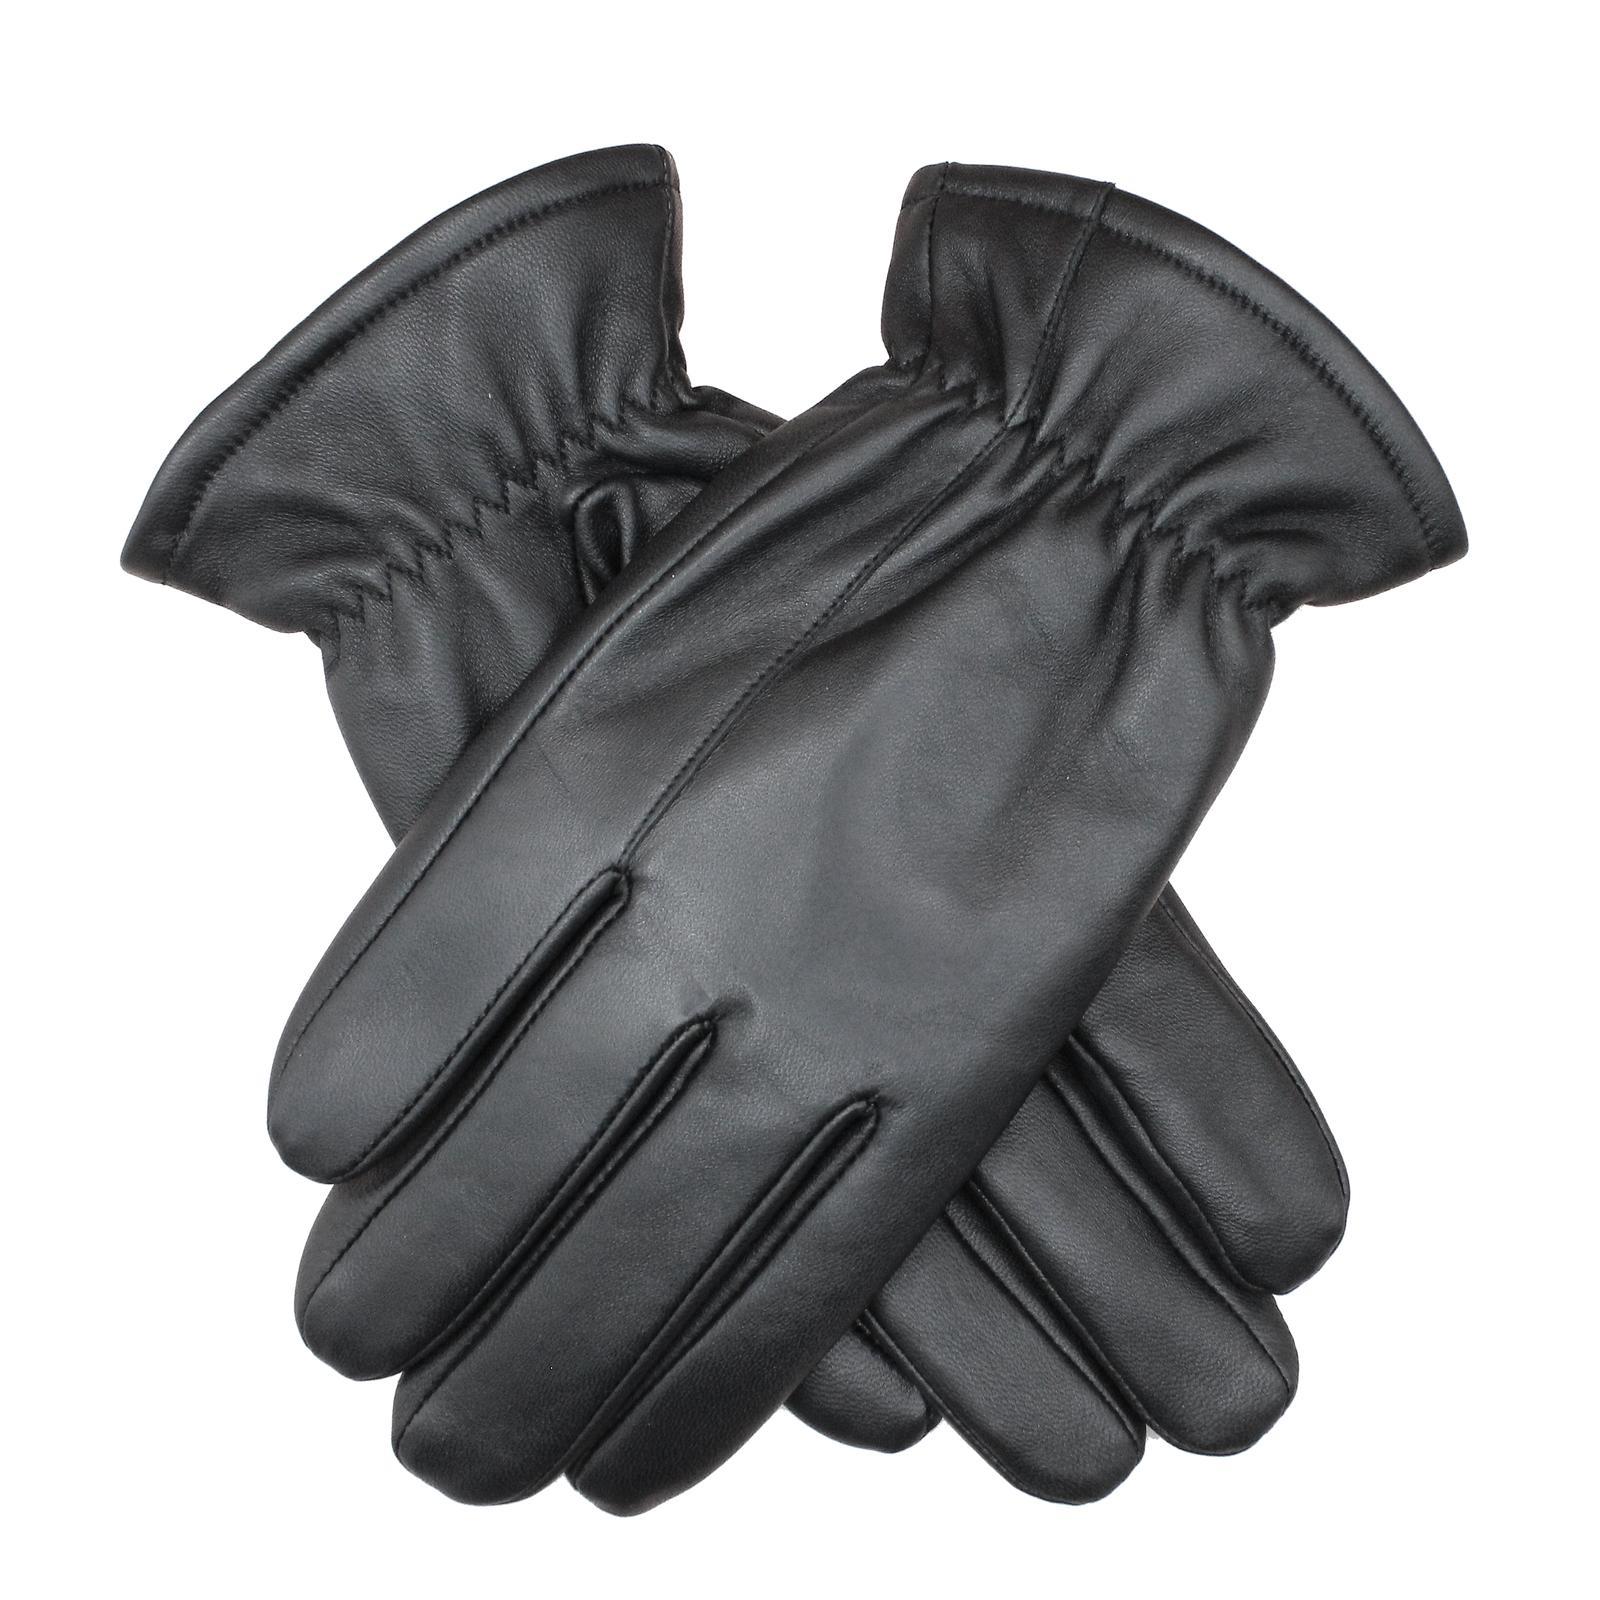 3M Thinsulate Mens Sheepskin Leather Gloves with Gathered Wrist in Black - S/M